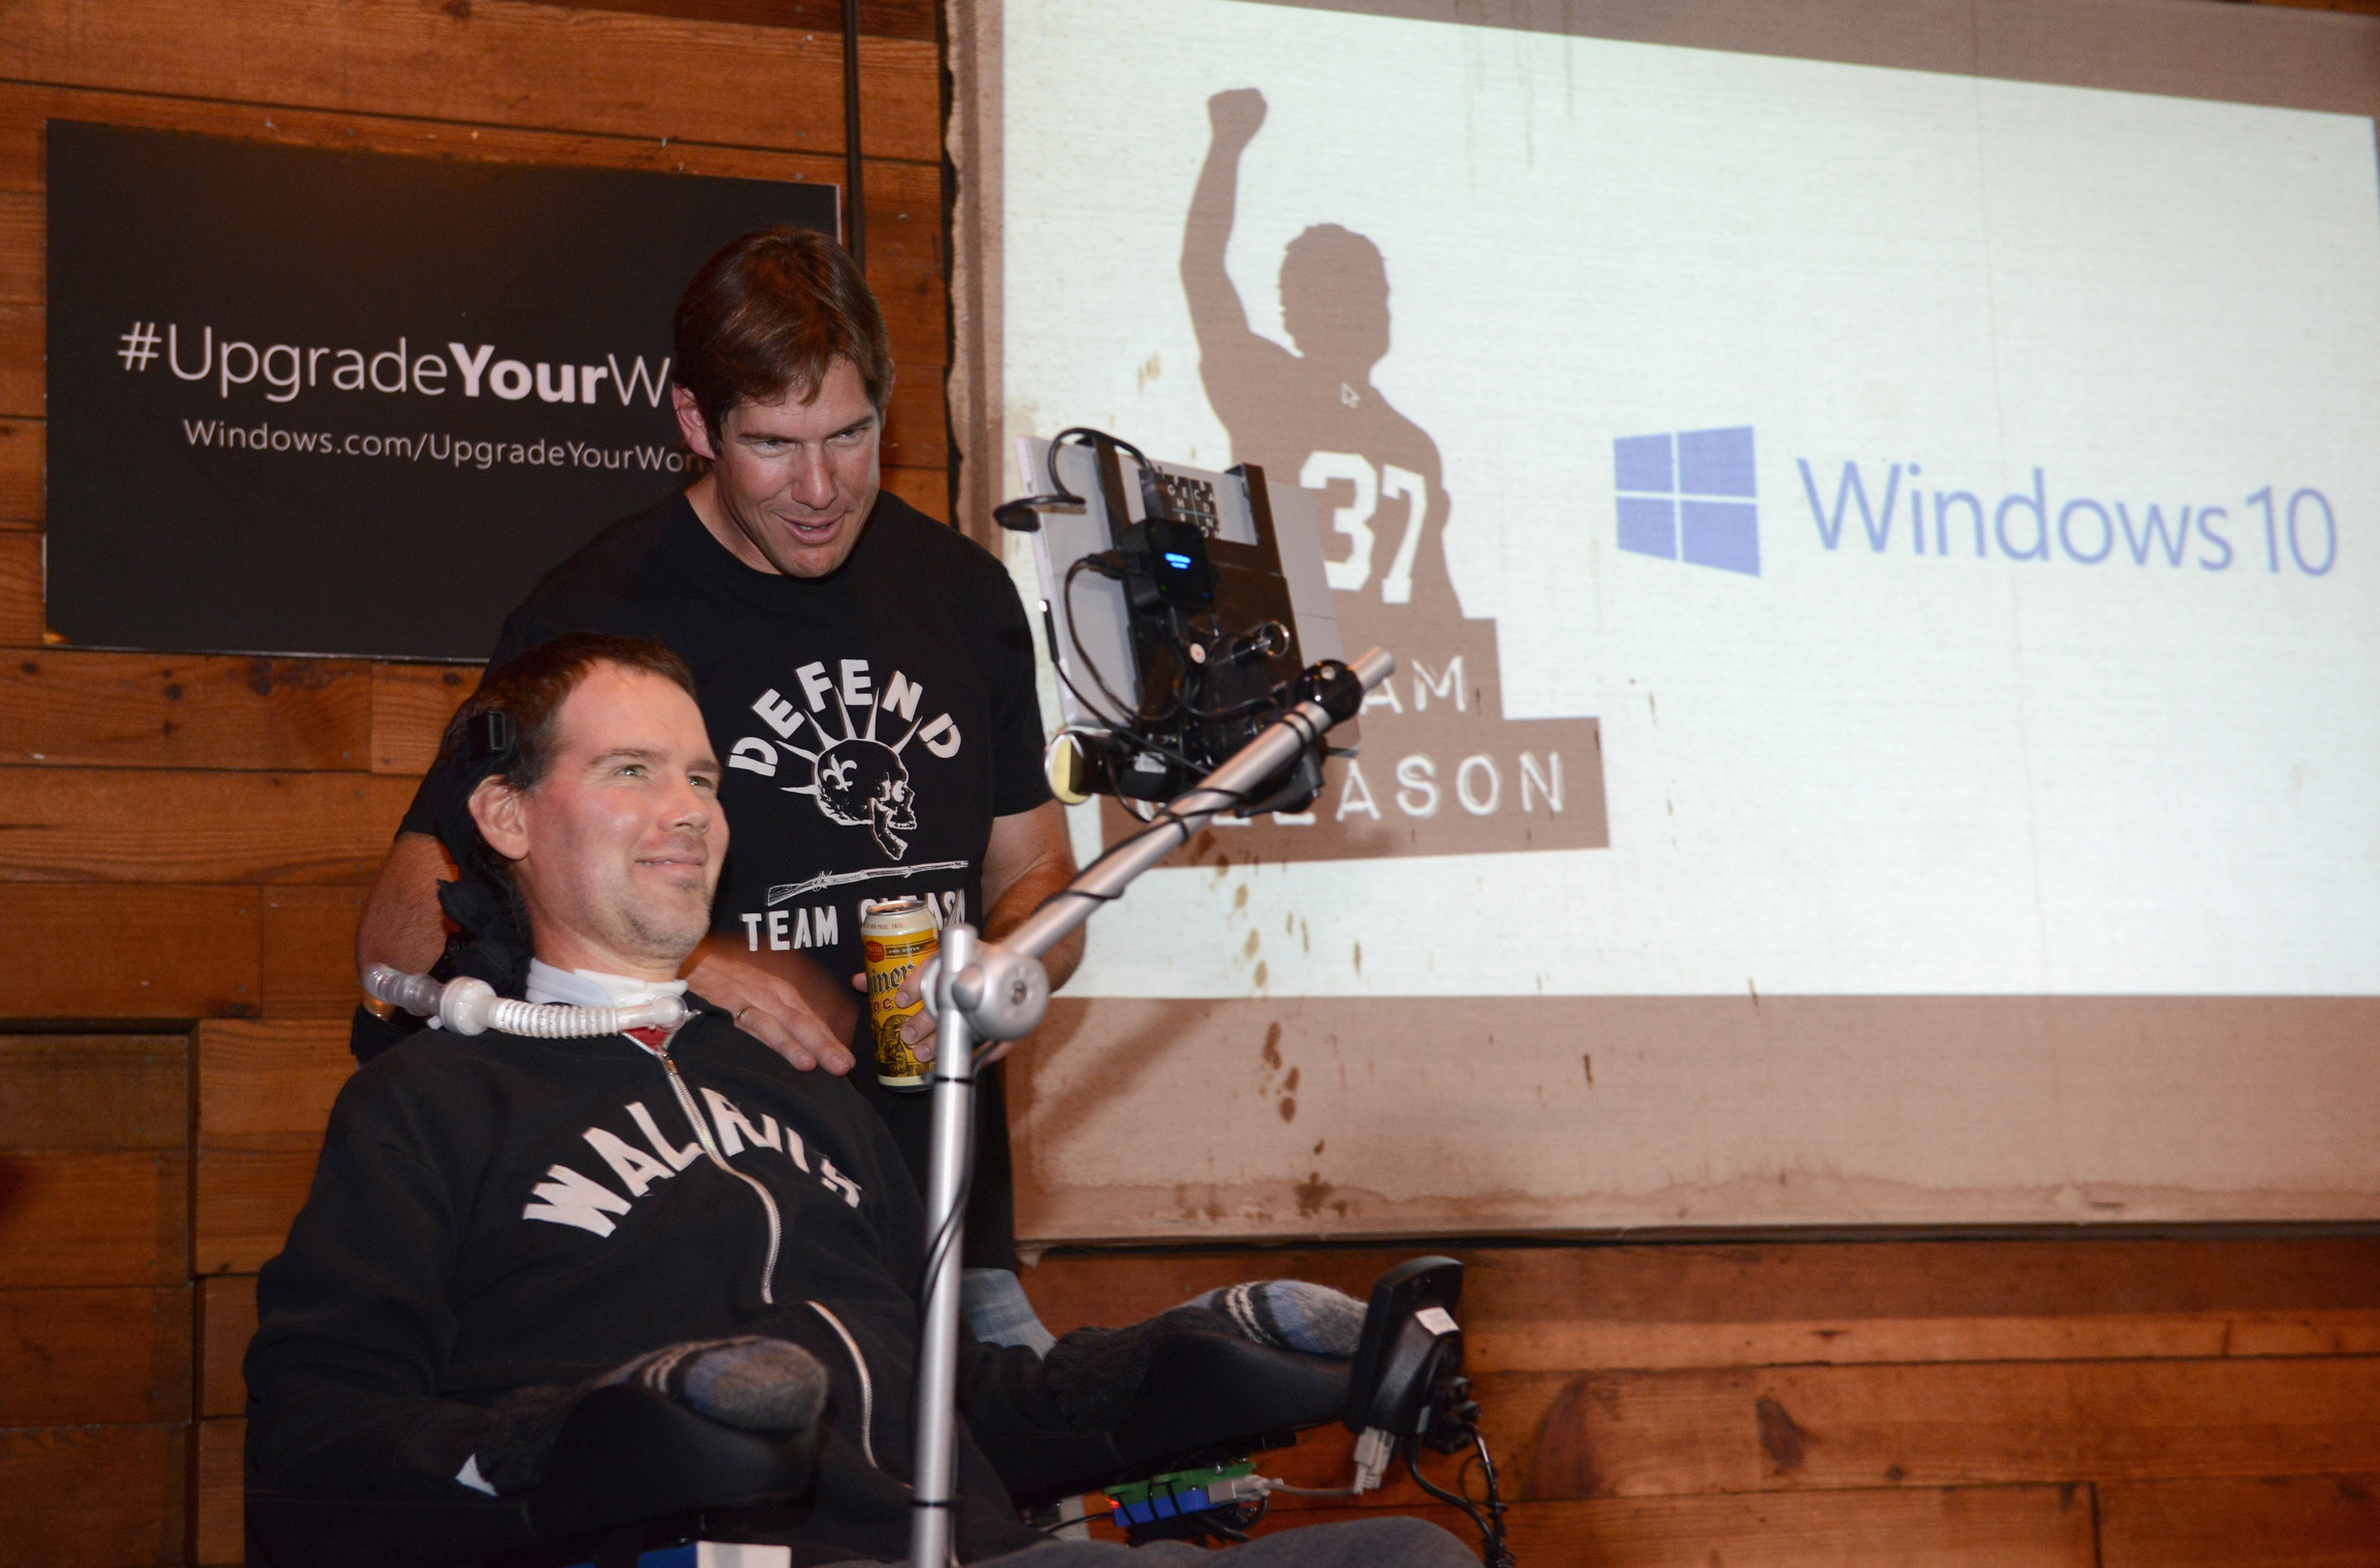 AUSTIN, TX - MARCH 11:  Former NFL Player and ALS Advocate Steve Gleason (L) and former NFL player and producer Scott Fujita speak onstage during a fireside chat with Steve Gleason hosted by Windows 10 and Team Gleason at SXSW at Mohawk on March 11, 2016 in Austin, Texas.  (Photo by Sasha Haagensen/Getty Images for Microsoft)